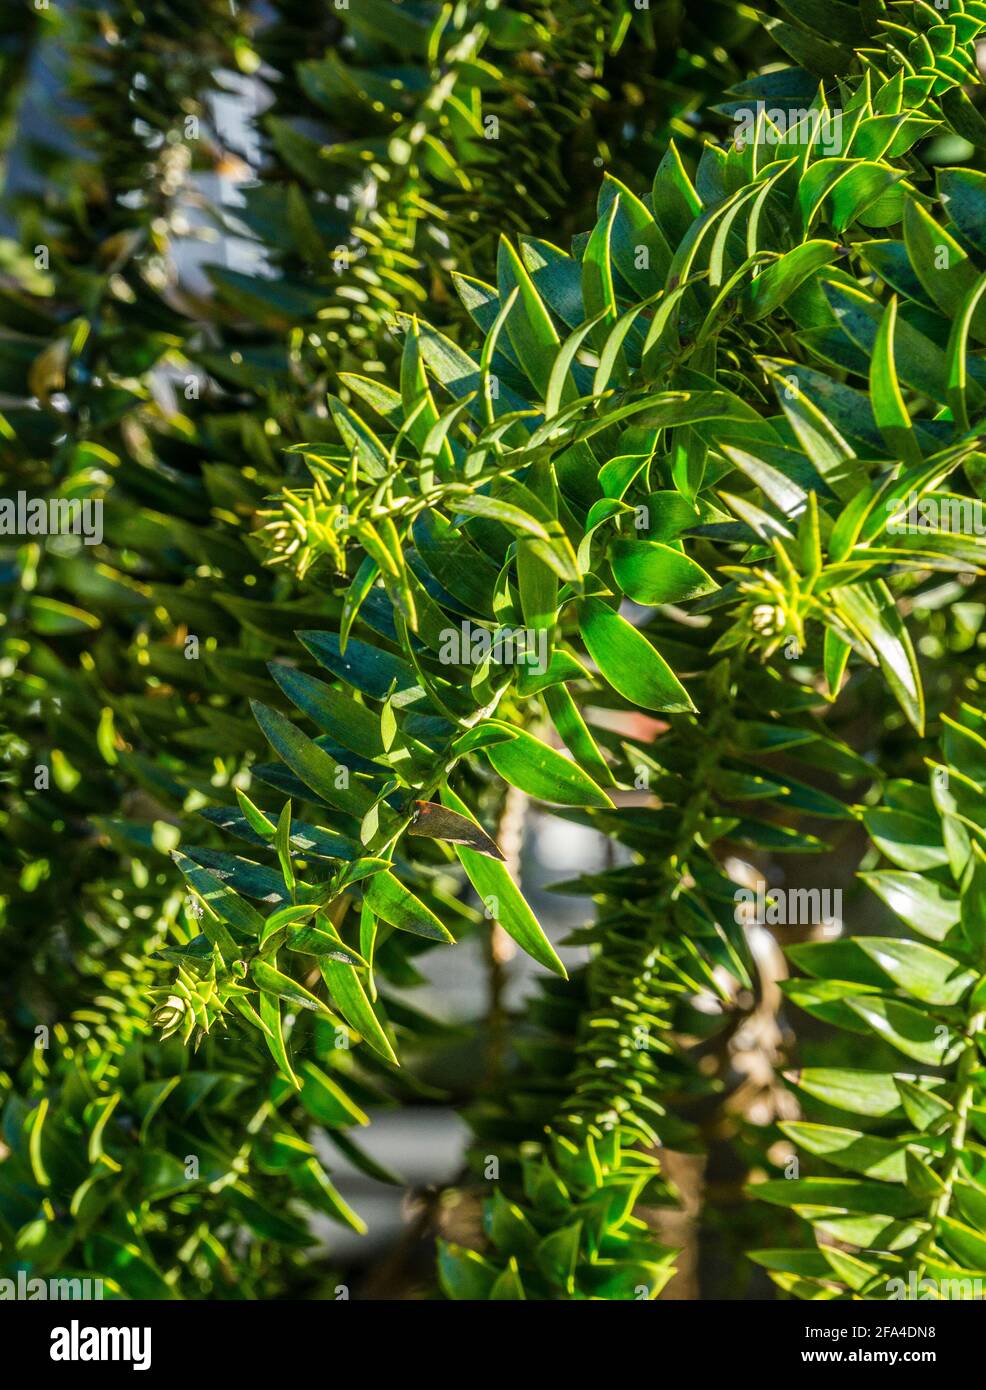 the pointed leafs of Bunya Pine are arrayed radially around the branchlet, Bunya Mountains National Park, South Burnett Region, Queensland, Australia Stock Photo